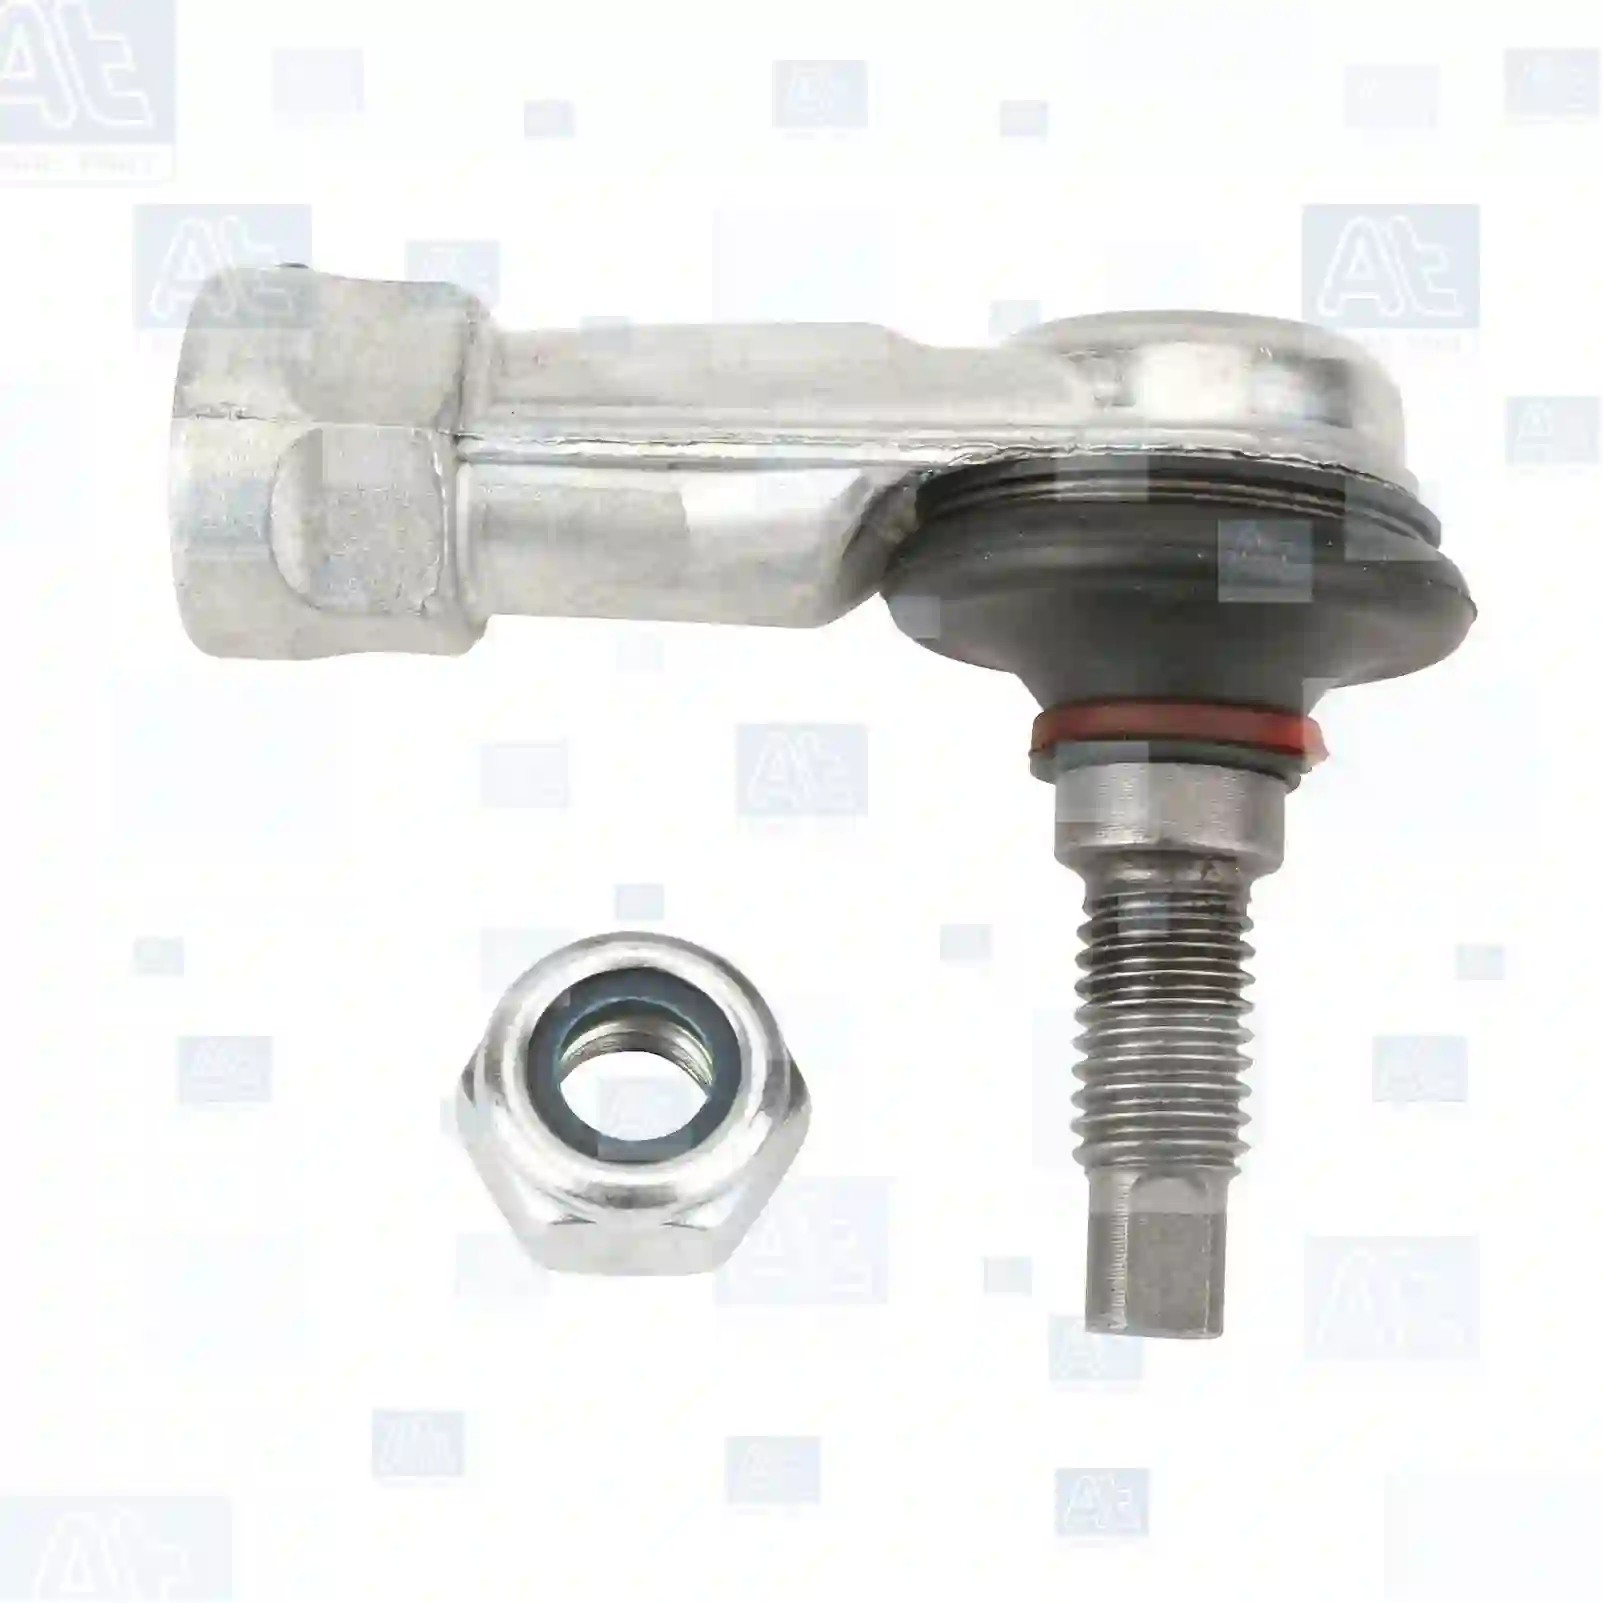 Ball joint, left hand thread, at no 77731618, oem no: 00021927, 0140363, 0592106, 0656084, 1249088, 140363, 1457400, 592106, 656084, 42485638, 191708, 7394145, 02524128, 08198187, 42485638, 00191708, 02524128, 08198187, 42485638, 500056188, 5001000134, 8198187, 2150021200, 5004154, 81953016063, 81953016131, 81953016171, 81953016174, 90900989011, 0002684789, 0002686189, 0002689789, 3662680489, 011010221, 34437-9X403, 5006017504, 7401190132, 1384897, 305319, 371451, 421325, 523743, 525732, 527055, 8321999836, 0928500070, 0732107019, 1190132, 11901329, 1696684, ZG40134-0008 At Spare Part | Engine, Accelerator Pedal, Camshaft, Connecting Rod, Crankcase, Crankshaft, Cylinder Head, Engine Suspension Mountings, Exhaust Manifold, Exhaust Gas Recirculation, Filter Kits, Flywheel Housing, General Overhaul Kits, Engine, Intake Manifold, Oil Cleaner, Oil Cooler, Oil Filter, Oil Pump, Oil Sump, Piston & Liner, Sensor & Switch, Timing Case, Turbocharger, Cooling System, Belt Tensioner, Coolant Filter, Coolant Pipe, Corrosion Prevention Agent, Drive, Expansion Tank, Fan, Intercooler, Monitors & Gauges, Radiator, Thermostat, V-Belt / Timing belt, Water Pump, Fuel System, Electronical Injector Unit, Feed Pump, Fuel Filter, cpl., Fuel Gauge Sender,  Fuel Line, Fuel Pump, Fuel Tank, Injection Line Kit, Injection Pump, Exhaust System, Clutch & Pedal, Gearbox, Propeller Shaft, Axles, Brake System, Hubs & Wheels, Suspension, Leaf Spring, Universal Parts / Accessories, Steering, Electrical System, Cabin Ball joint, left hand thread, at no 77731618, oem no: 00021927, 0140363, 0592106, 0656084, 1249088, 140363, 1457400, 592106, 656084, 42485638, 191708, 7394145, 02524128, 08198187, 42485638, 00191708, 02524128, 08198187, 42485638, 500056188, 5001000134, 8198187, 2150021200, 5004154, 81953016063, 81953016131, 81953016171, 81953016174, 90900989011, 0002684789, 0002686189, 0002689789, 3662680489, 011010221, 34437-9X403, 5006017504, 7401190132, 1384897, 305319, 371451, 421325, 523743, 525732, 527055, 8321999836, 0928500070, 0732107019, 1190132, 11901329, 1696684, ZG40134-0008 At Spare Part | Engine, Accelerator Pedal, Camshaft, Connecting Rod, Crankcase, Crankshaft, Cylinder Head, Engine Suspension Mountings, Exhaust Manifold, Exhaust Gas Recirculation, Filter Kits, Flywheel Housing, General Overhaul Kits, Engine, Intake Manifold, Oil Cleaner, Oil Cooler, Oil Filter, Oil Pump, Oil Sump, Piston & Liner, Sensor & Switch, Timing Case, Turbocharger, Cooling System, Belt Tensioner, Coolant Filter, Coolant Pipe, Corrosion Prevention Agent, Drive, Expansion Tank, Fan, Intercooler, Monitors & Gauges, Radiator, Thermostat, V-Belt / Timing belt, Water Pump, Fuel System, Electronical Injector Unit, Feed Pump, Fuel Filter, cpl., Fuel Gauge Sender,  Fuel Line, Fuel Pump, Fuel Tank, Injection Line Kit, Injection Pump, Exhaust System, Clutch & Pedal, Gearbox, Propeller Shaft, Axles, Brake System, Hubs & Wheels, Suspension, Leaf Spring, Universal Parts / Accessories, Steering, Electrical System, Cabin